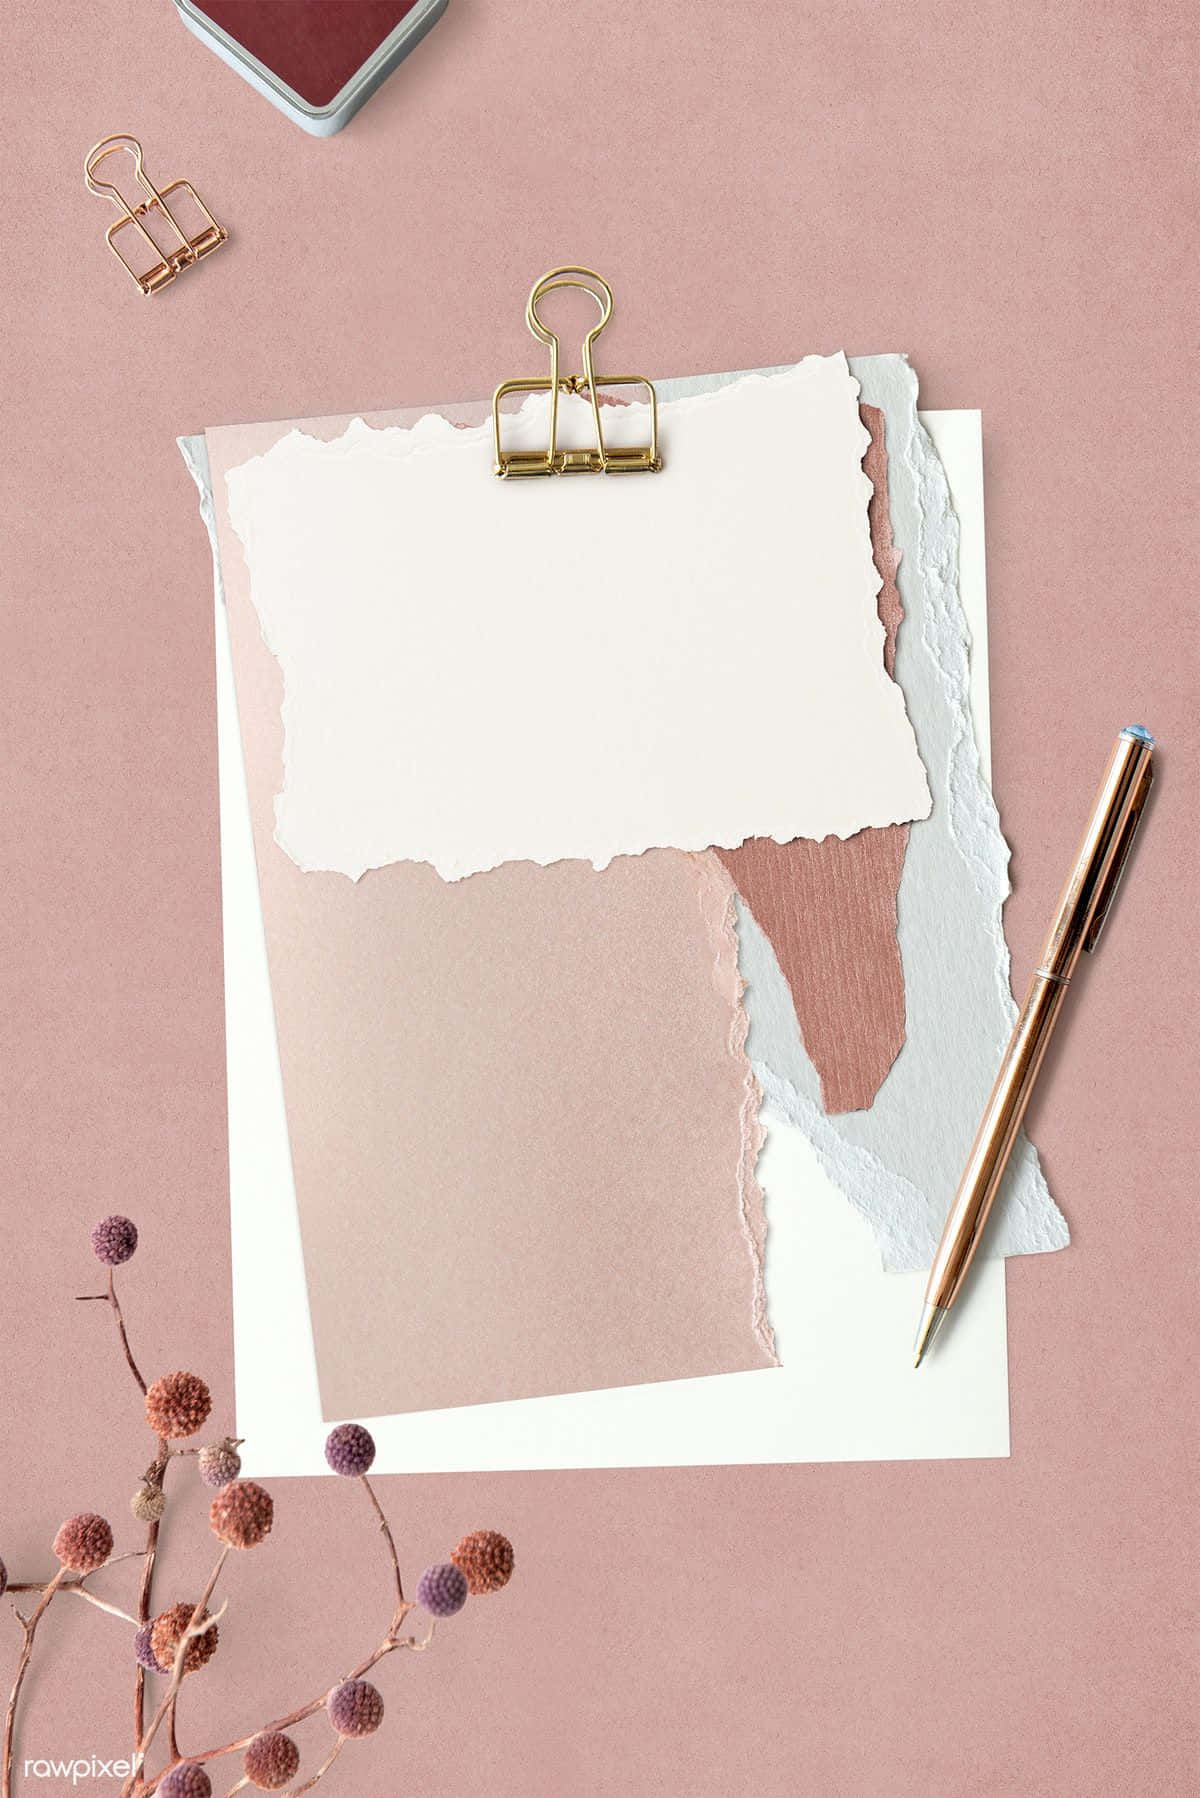 A Pink Paper Clip And A Pen On A Pink Background